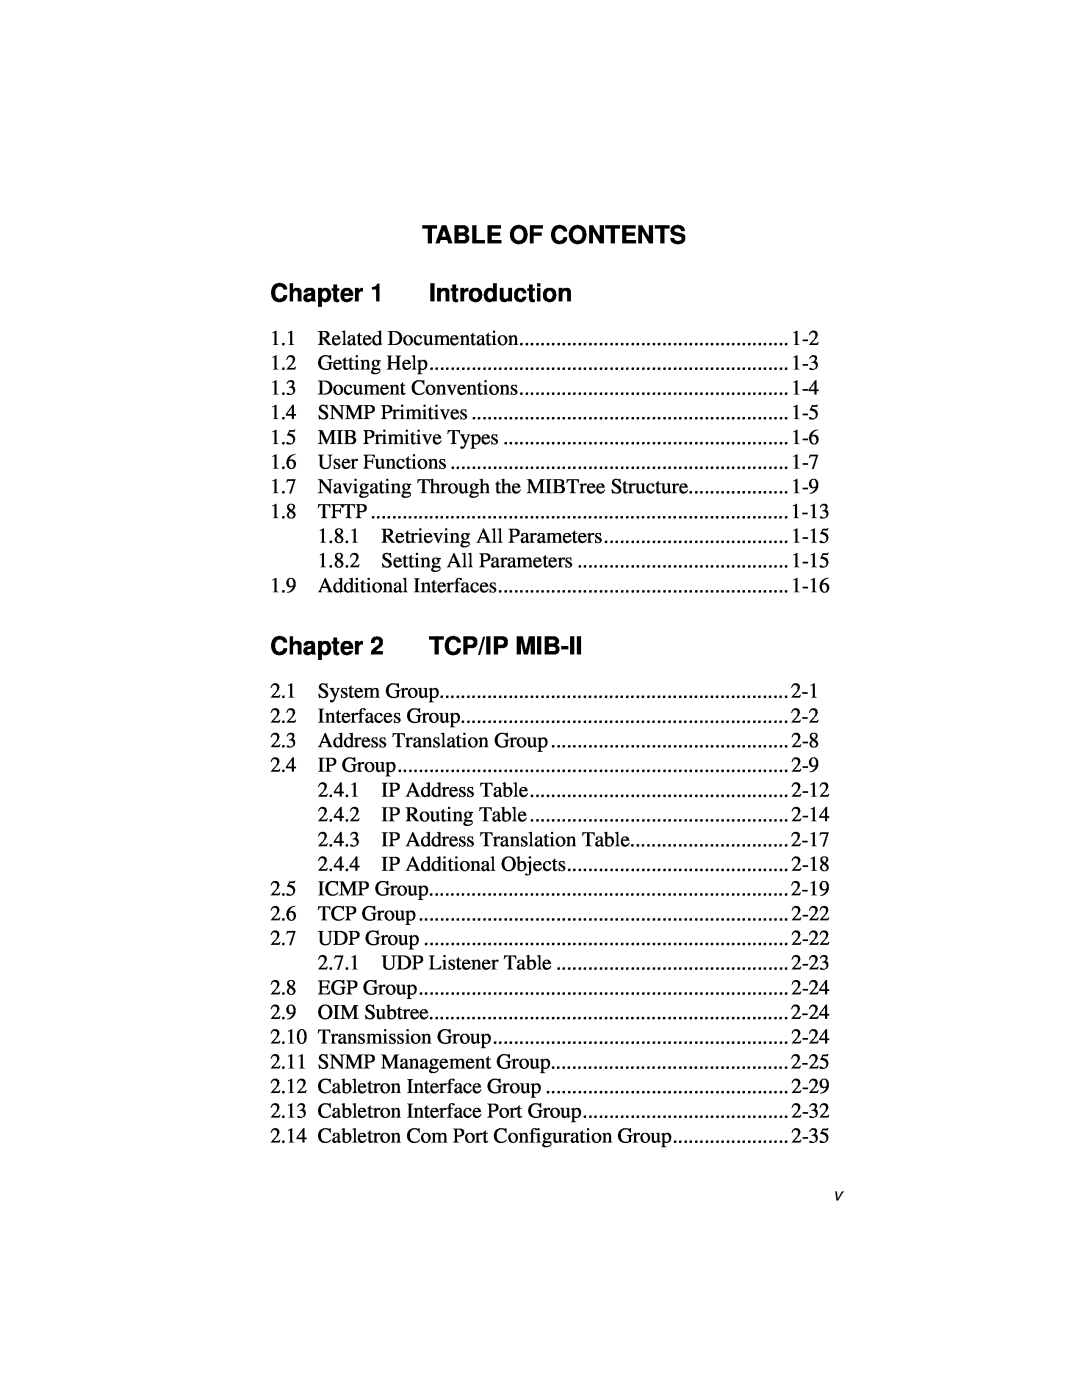 Cabletron Systems ELS10-26 manual Chapter, Introduction, Tcp/Ip Mib-Ii, Table Of Contents 